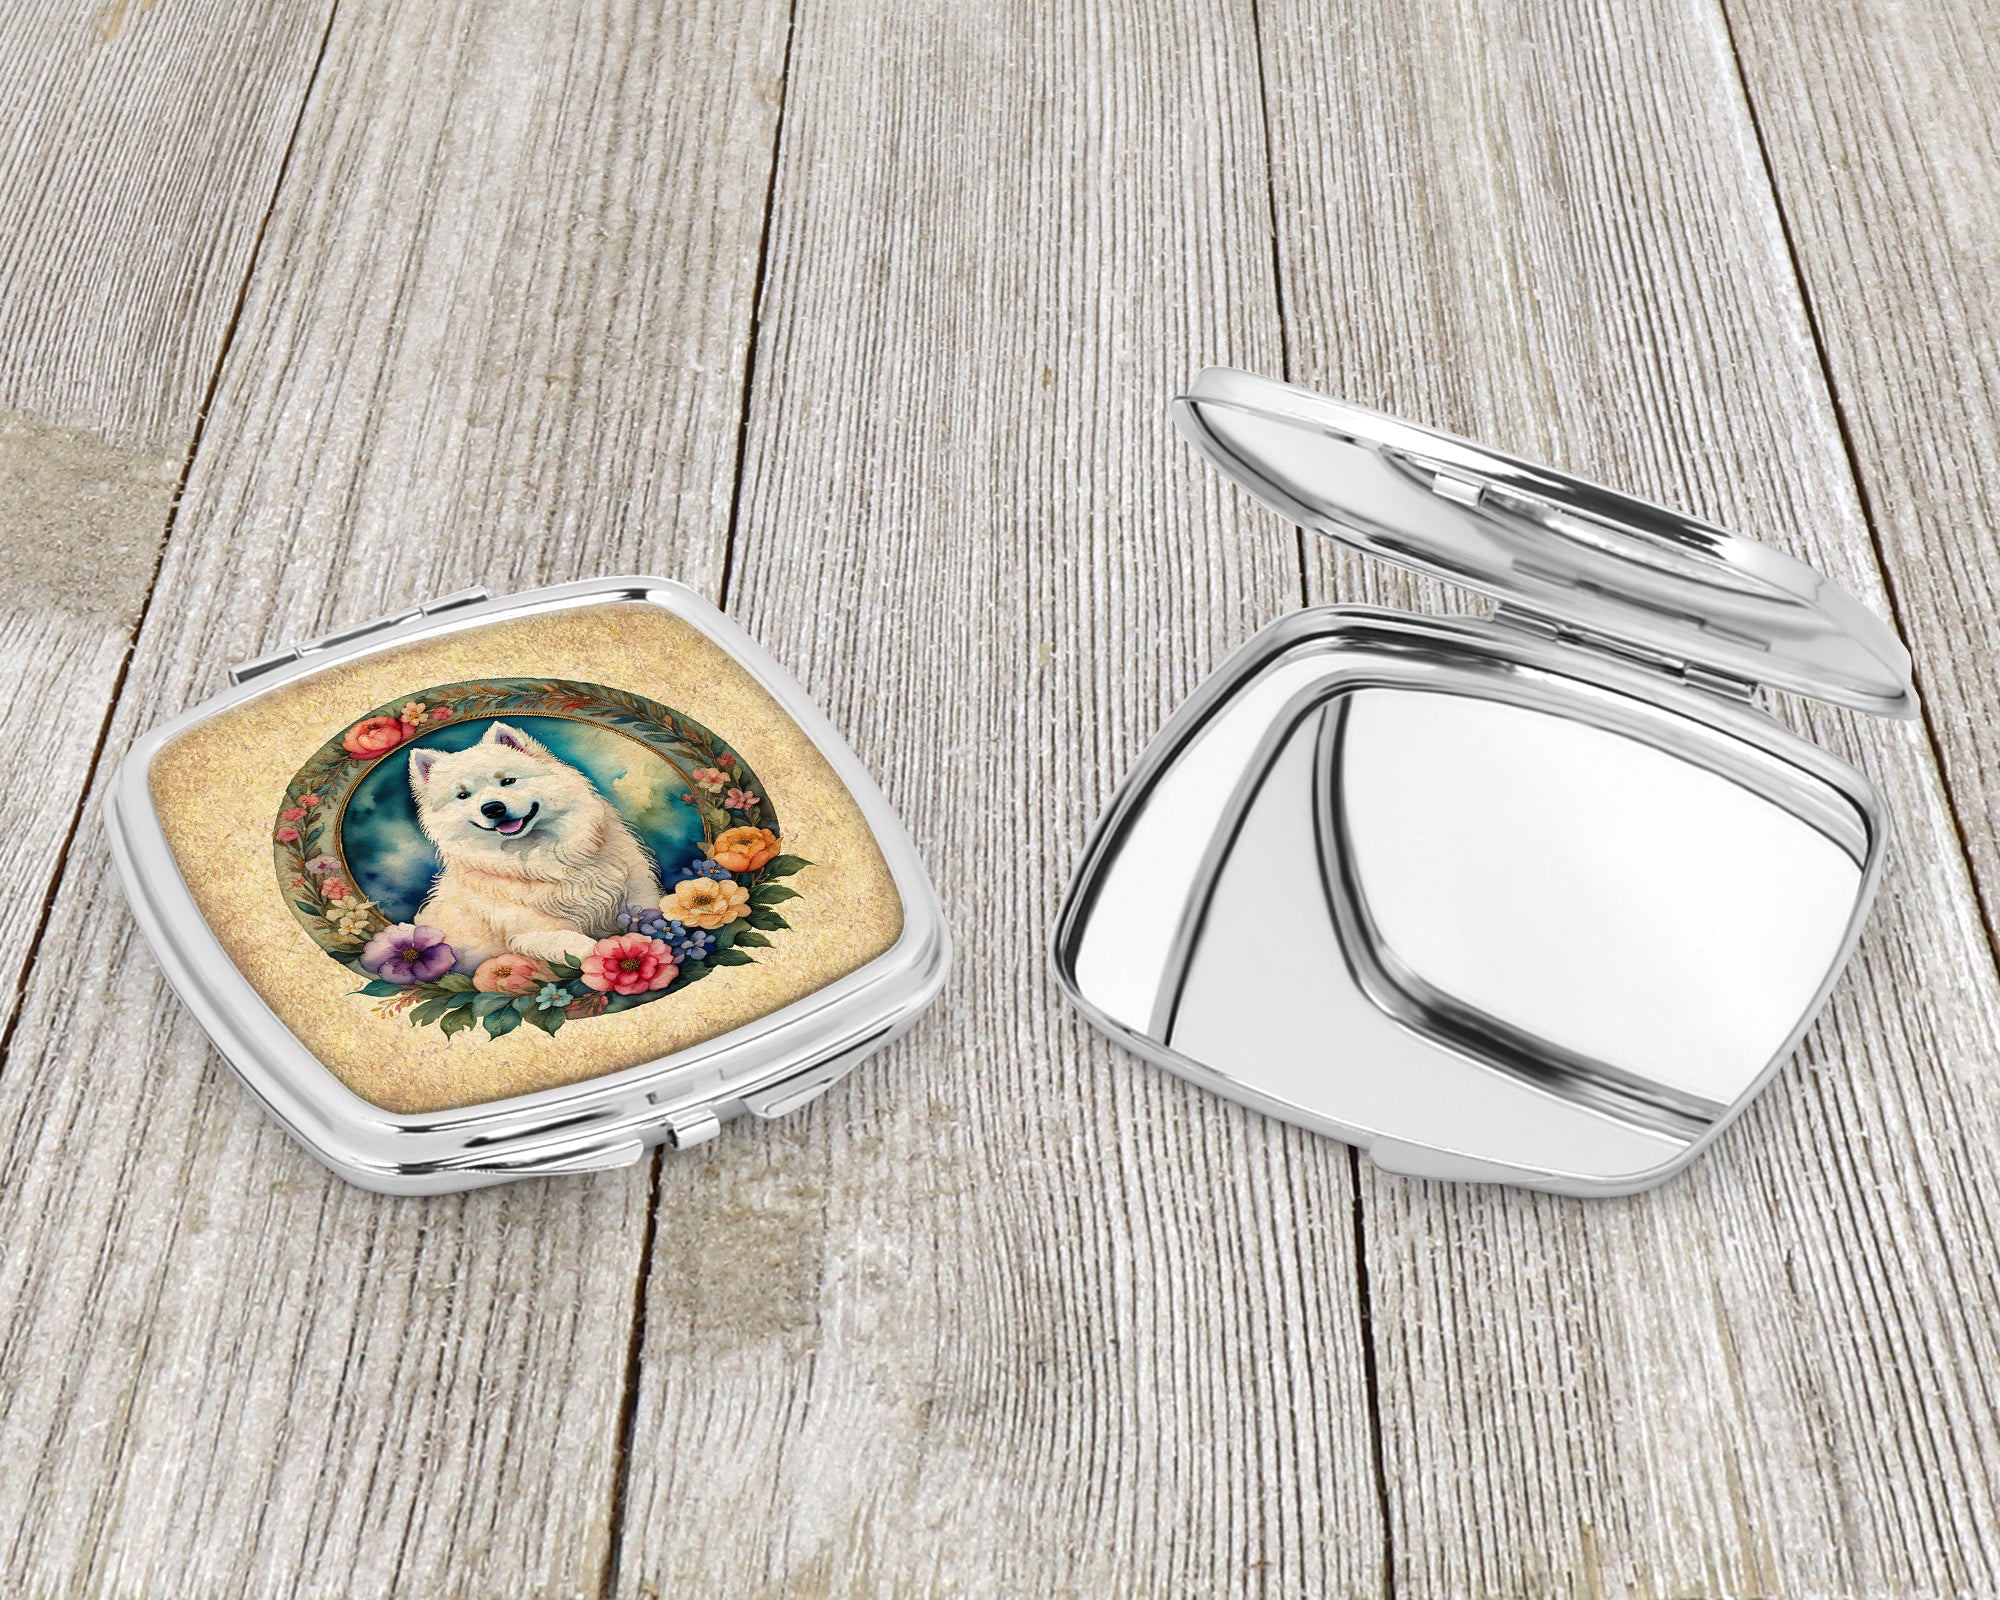 Samoyed and Flowers Compact Mirror